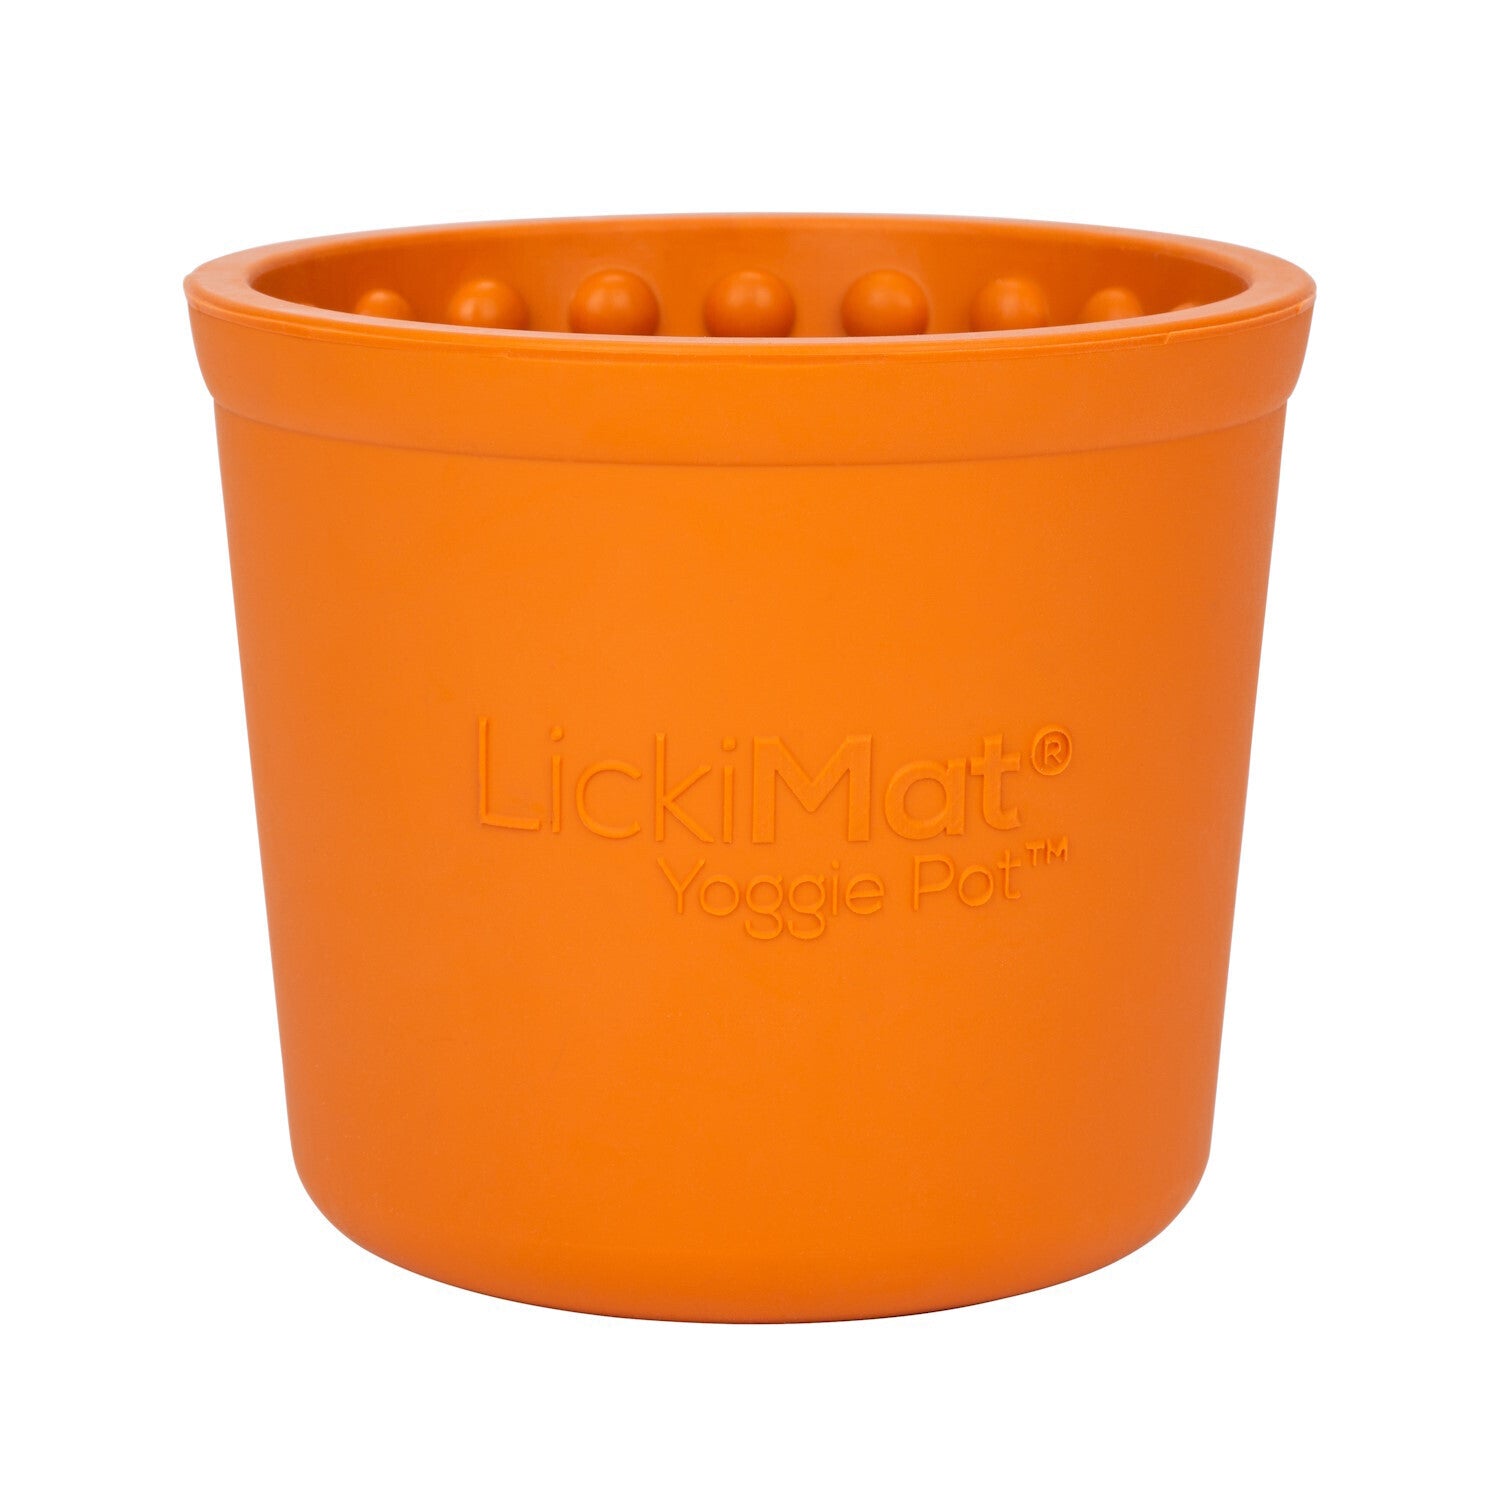 An orange LickiMat: Yoggie Pot Slow Feeder Bowl, potentially a pet enrichment accessory from Your Whole Dog.